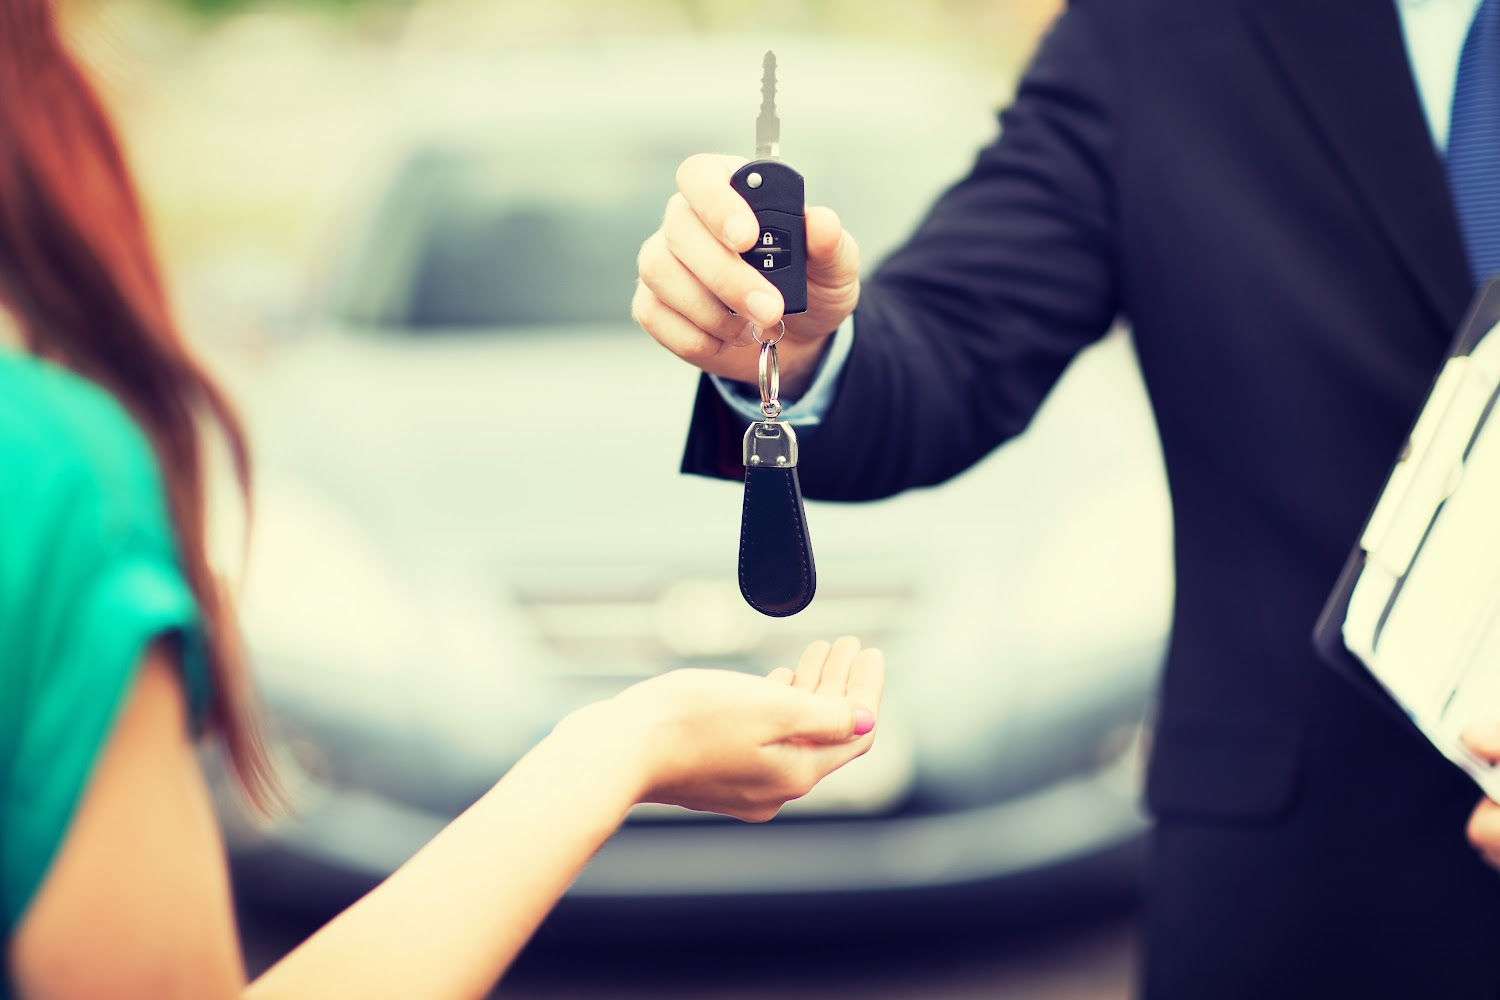 Should I finance or lease the car?